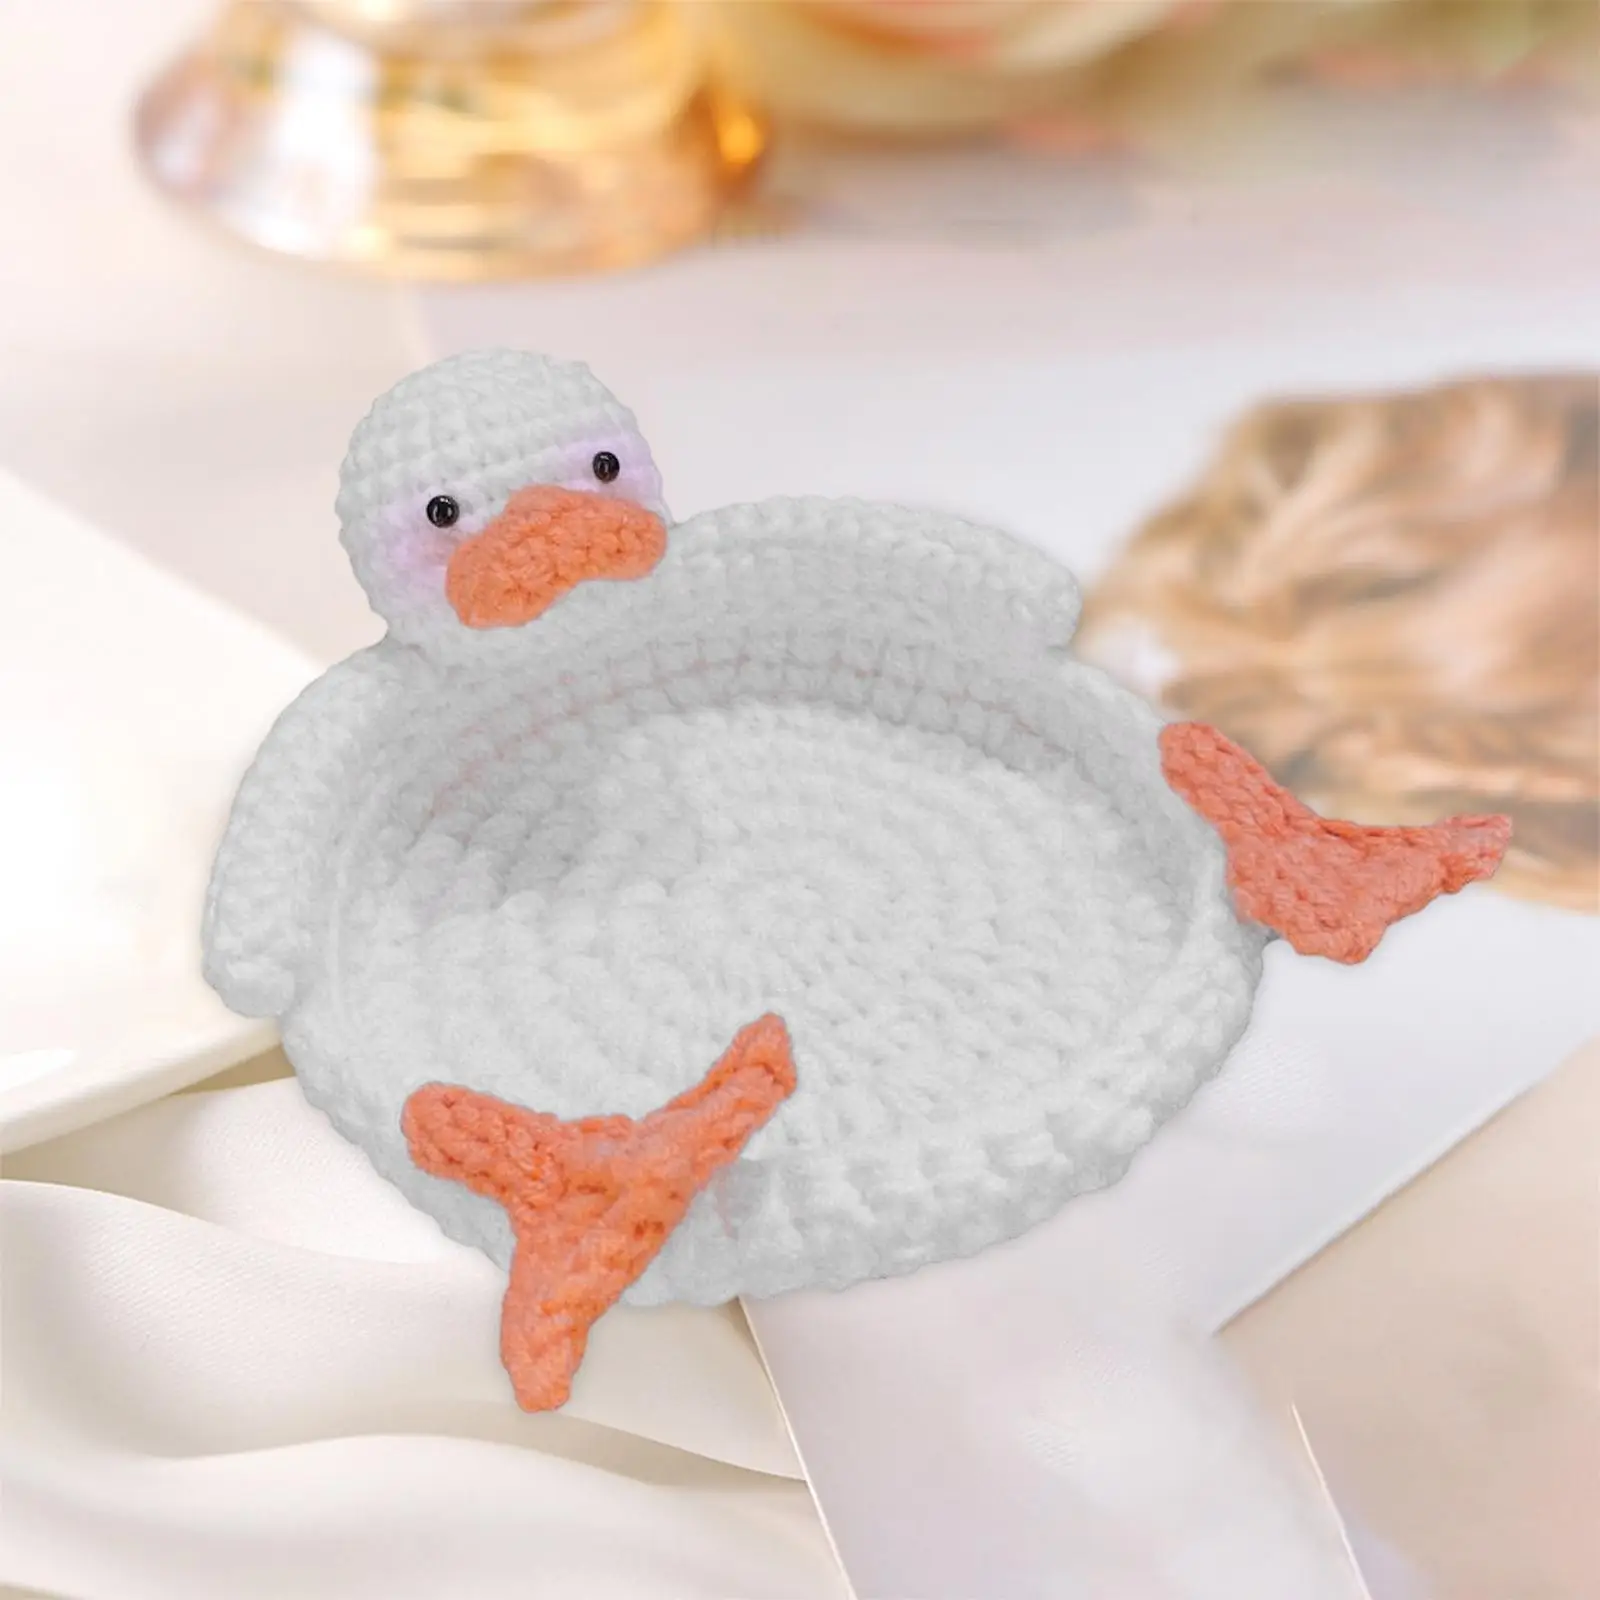 Drinks Tableware Pad Multipurpose Place Mats Duck Shaped Cute Coasters for Dining Table Bar Cafe Home Countertop